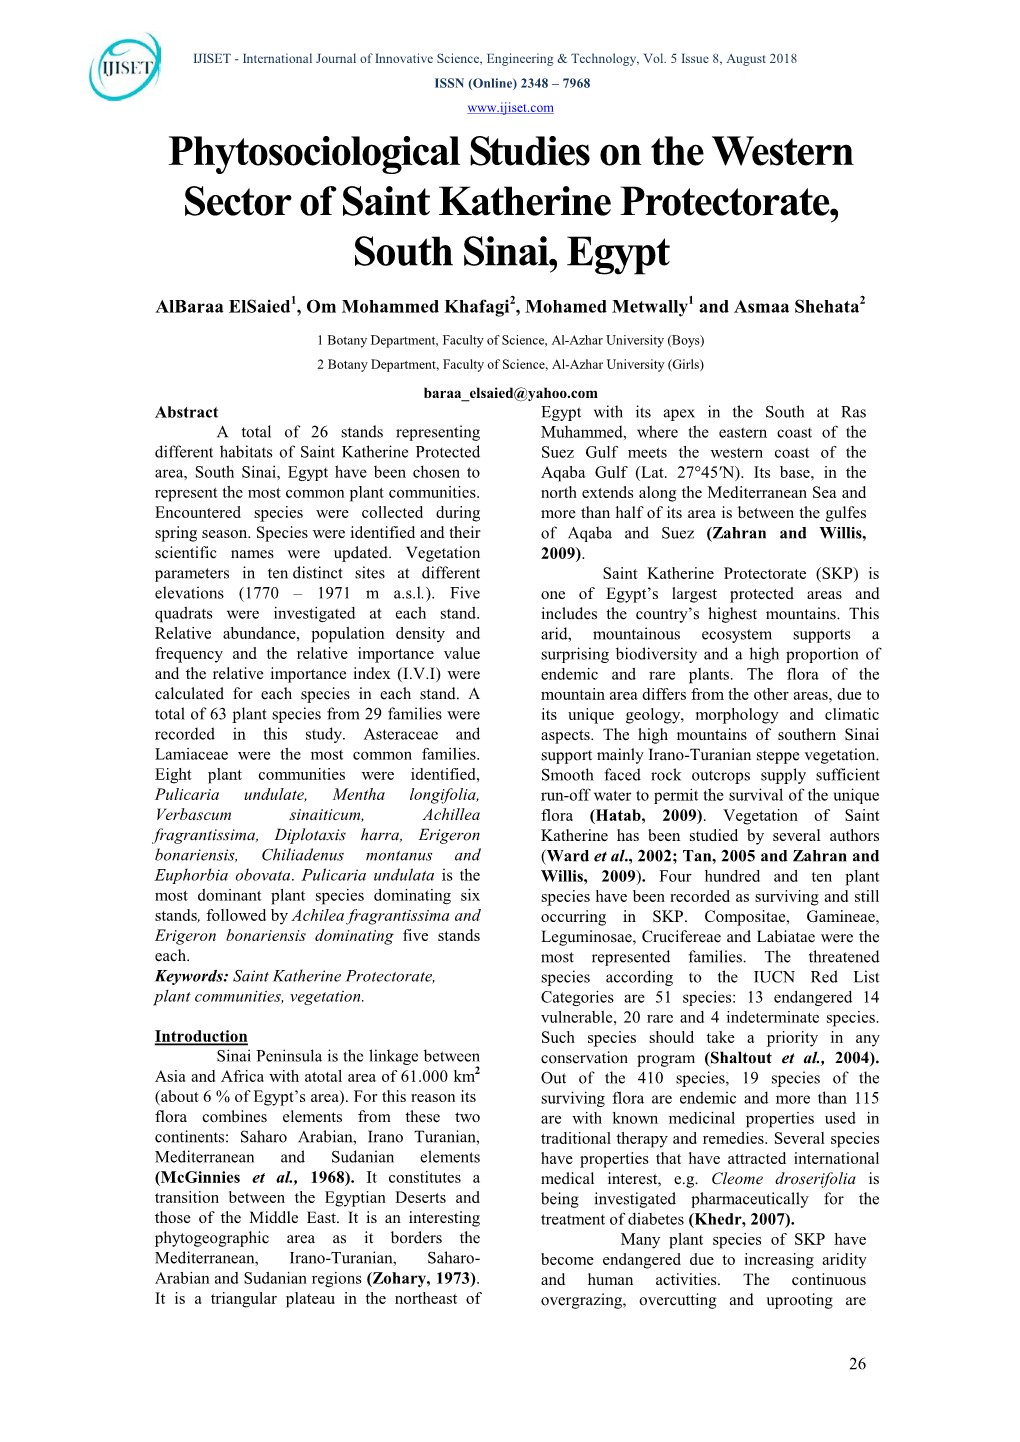 Phytosociological Studies on the Western Sector of Saint Katherine Protectorate, South Sinai, Egypt